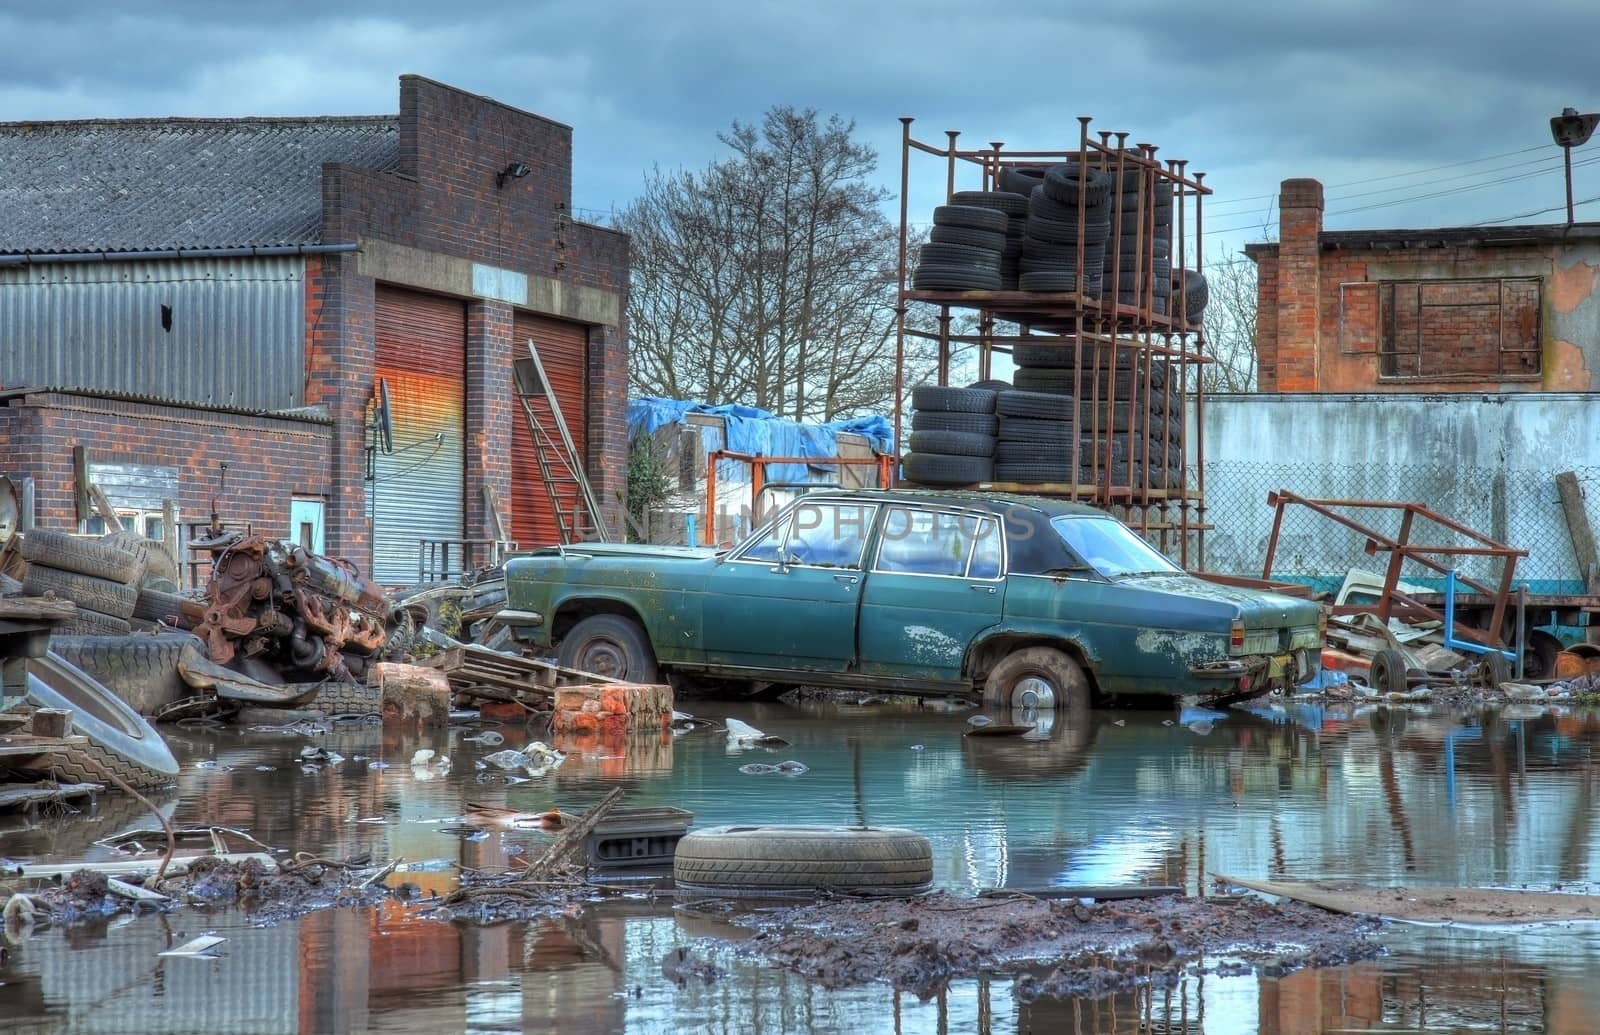 Scrapyard showing flood water and old car, Worcestershire, England.